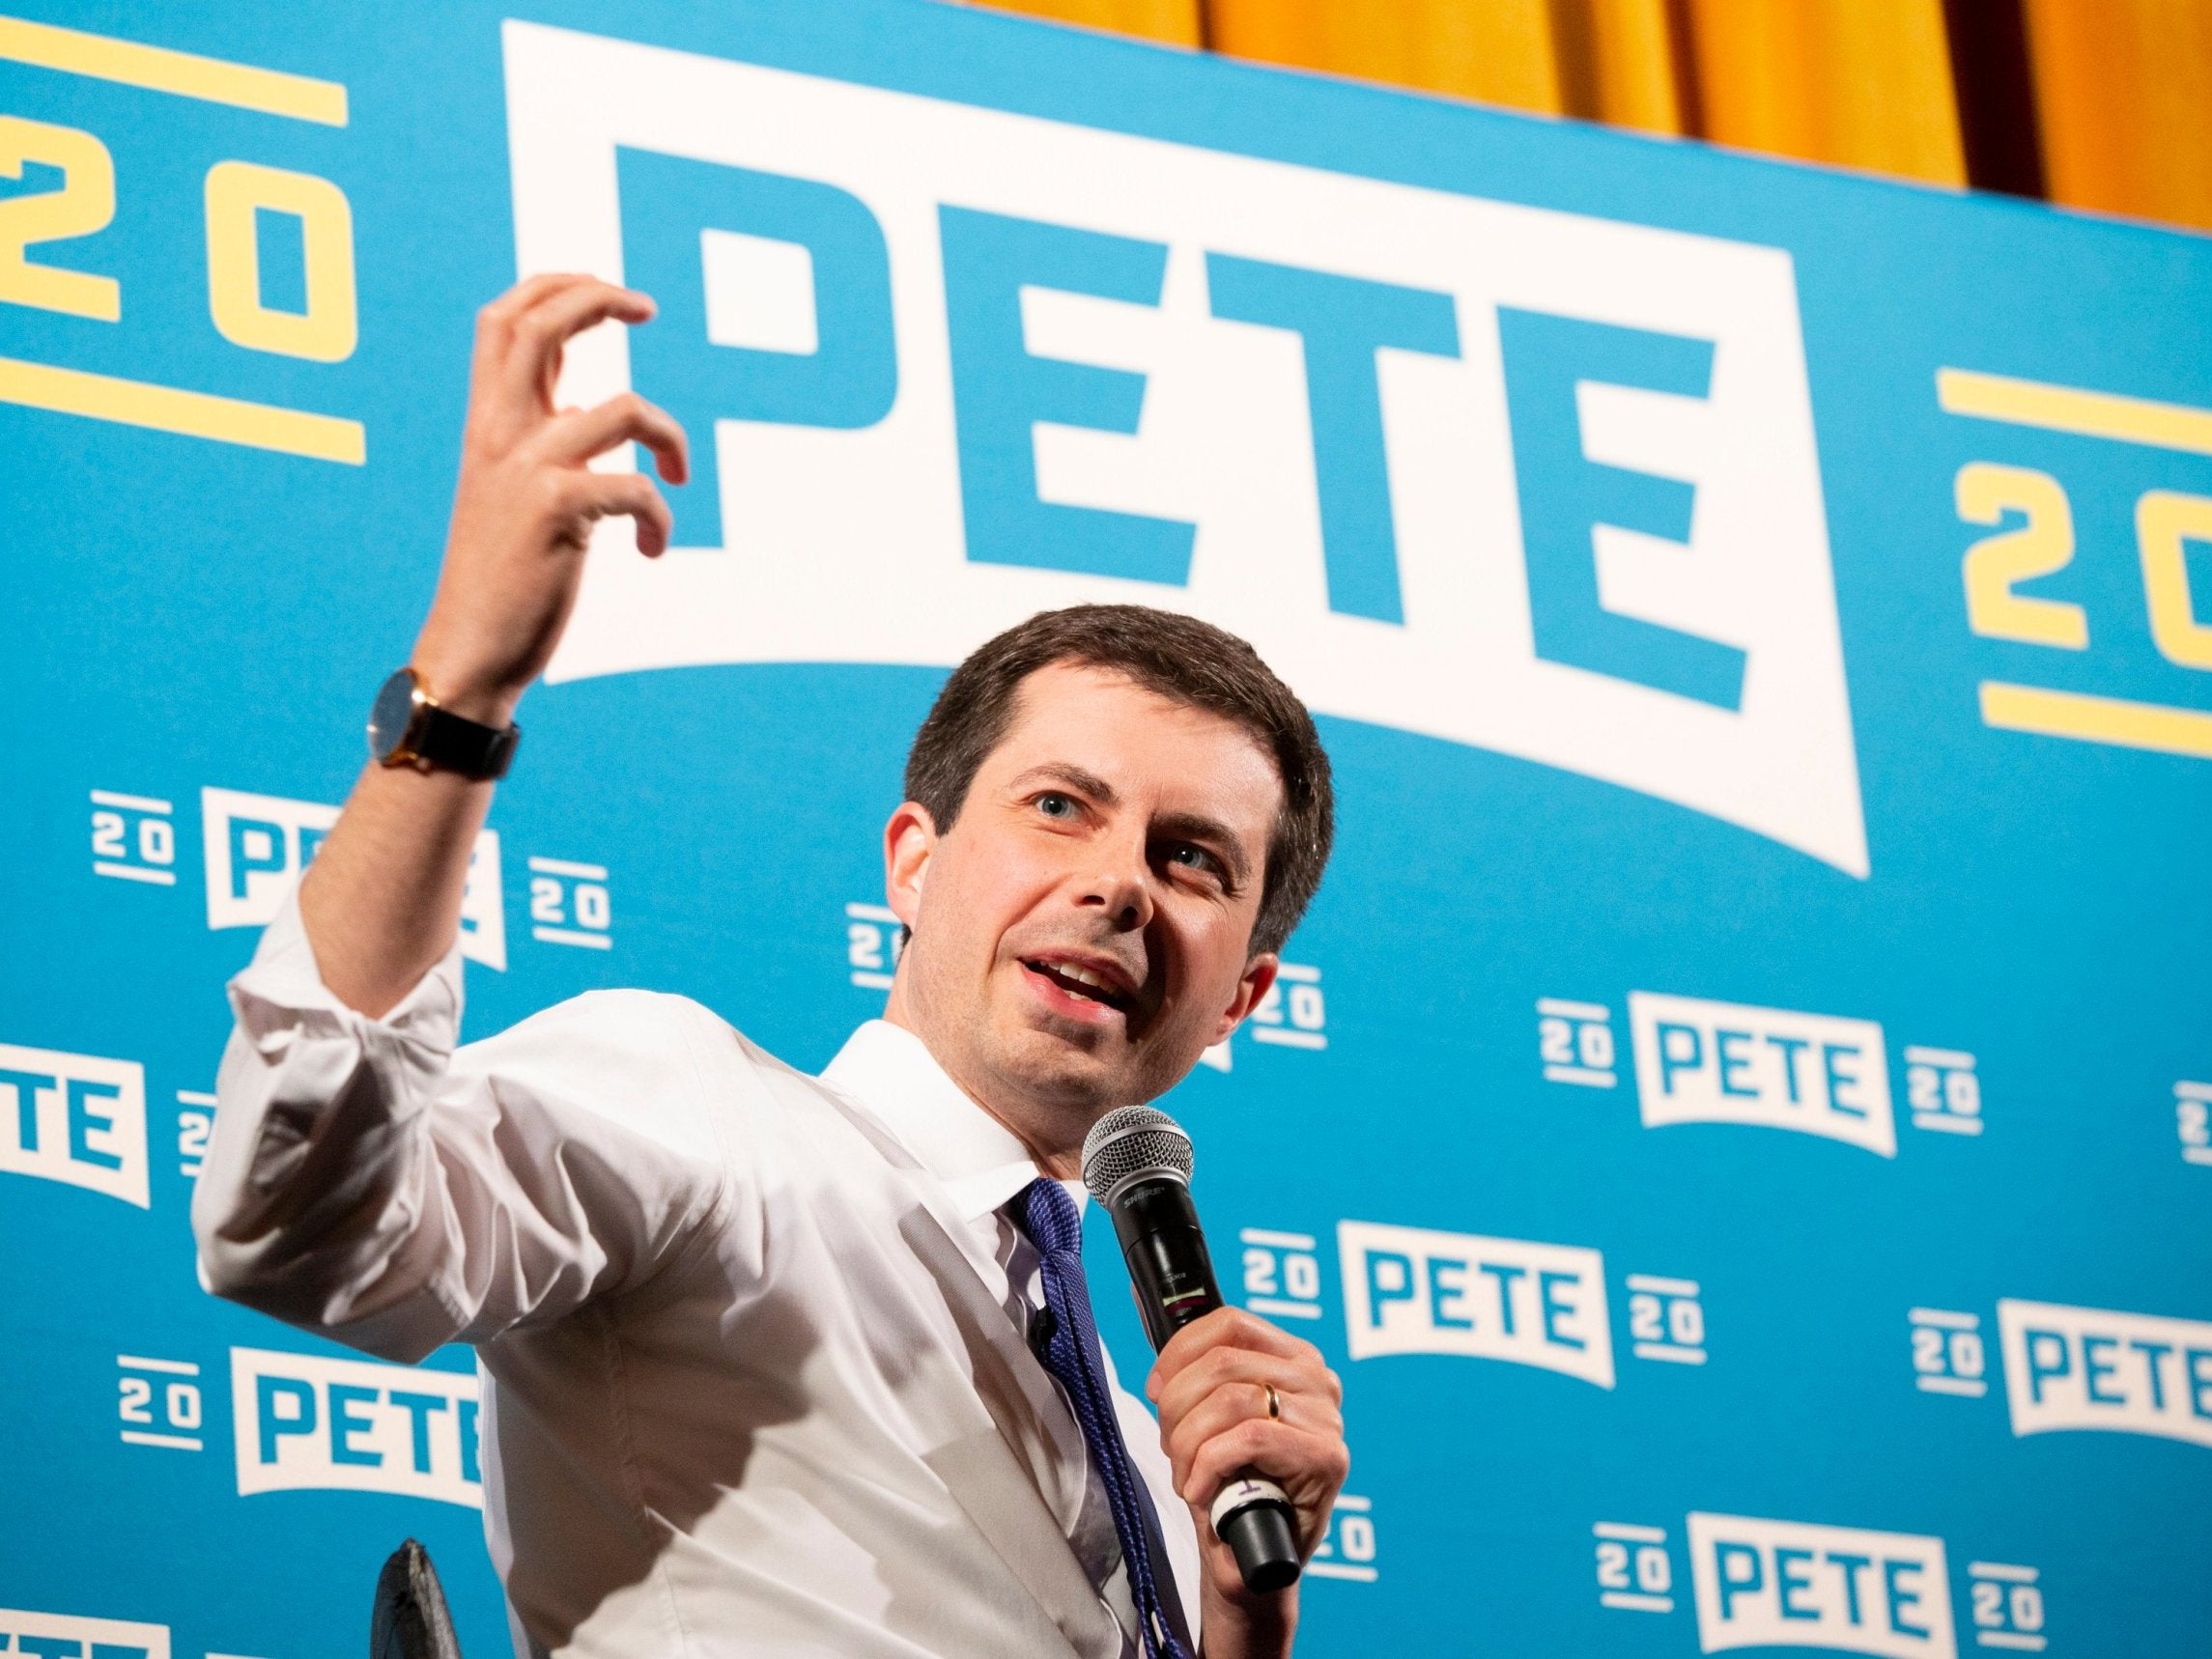 Related video: Pete Buttigieg says he 'needs help' in reaching black voters